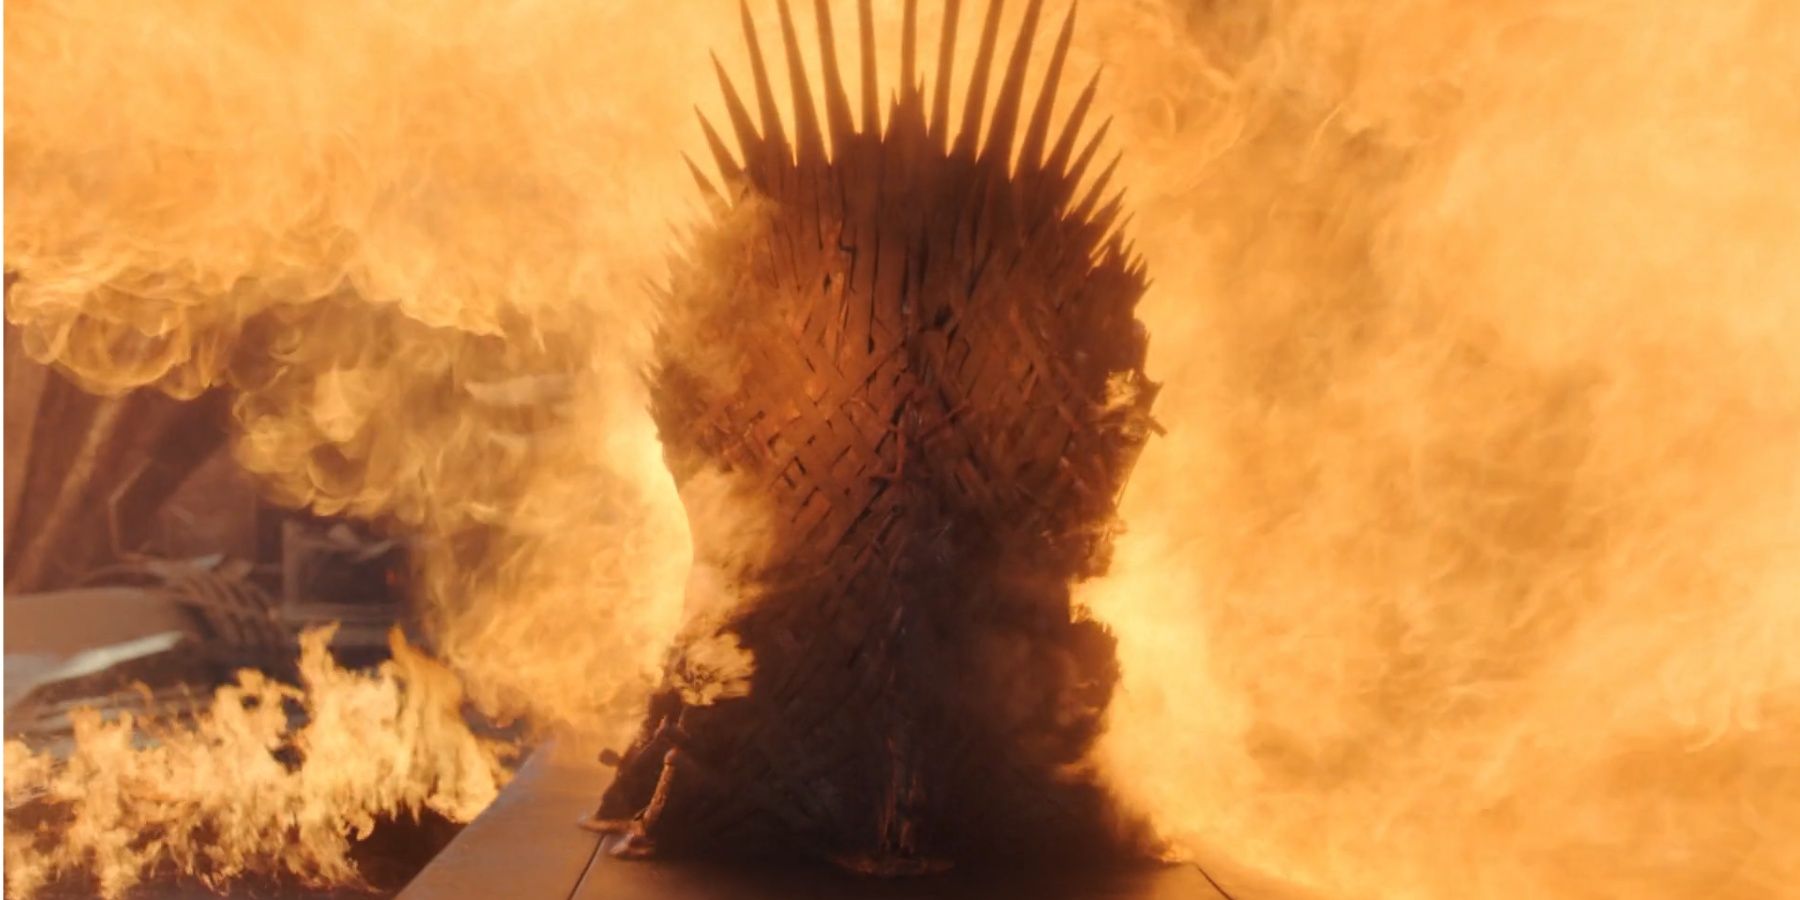 Drogon's Fire burns the Iron Throne in Game of Thrones. 